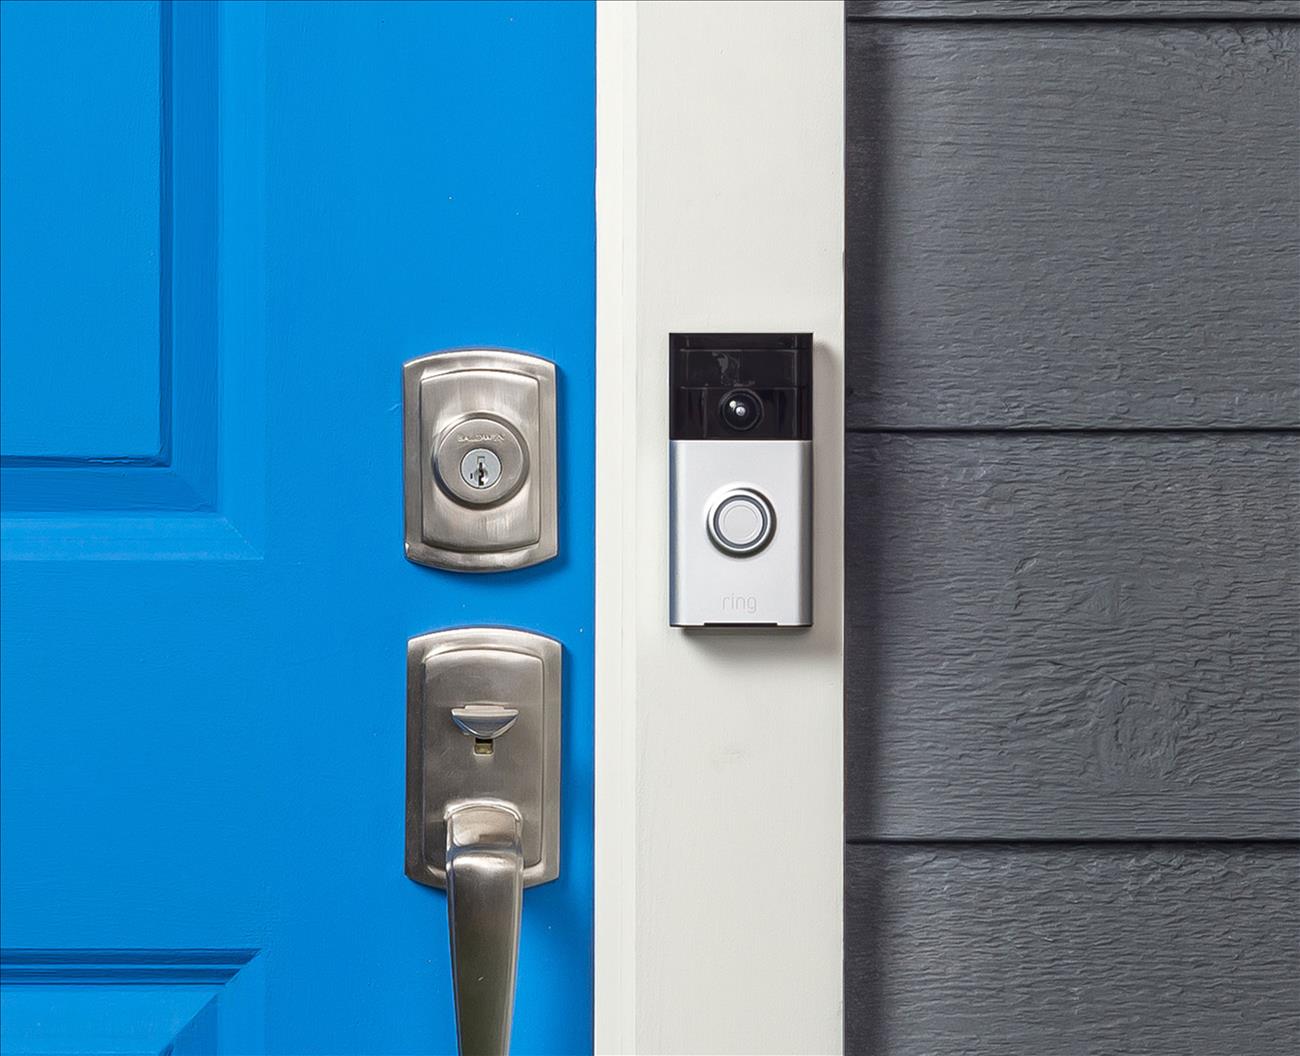 ring video home security